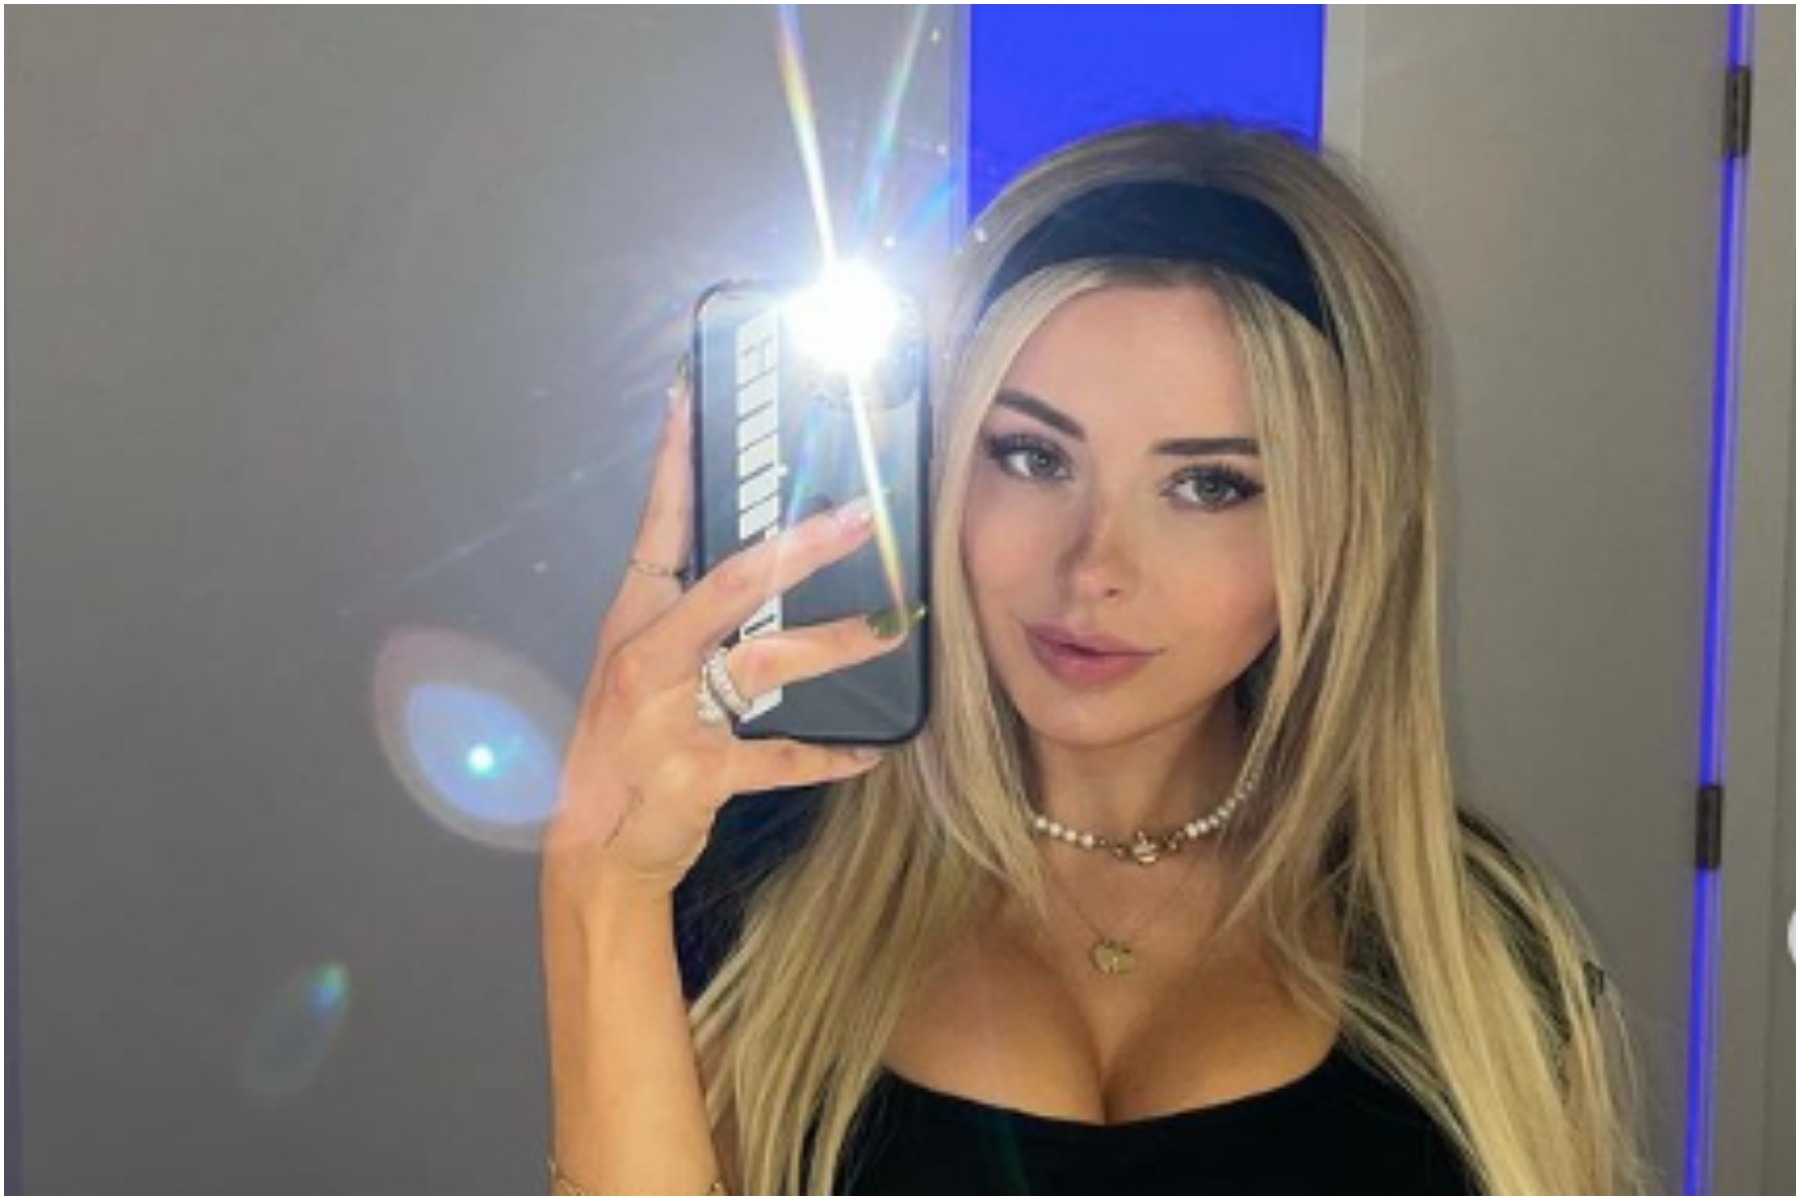 Corinna Kopf Of Leaks Corinna Kopf's OnlyFans Sparks Anger Because Pictures Are From Instagram